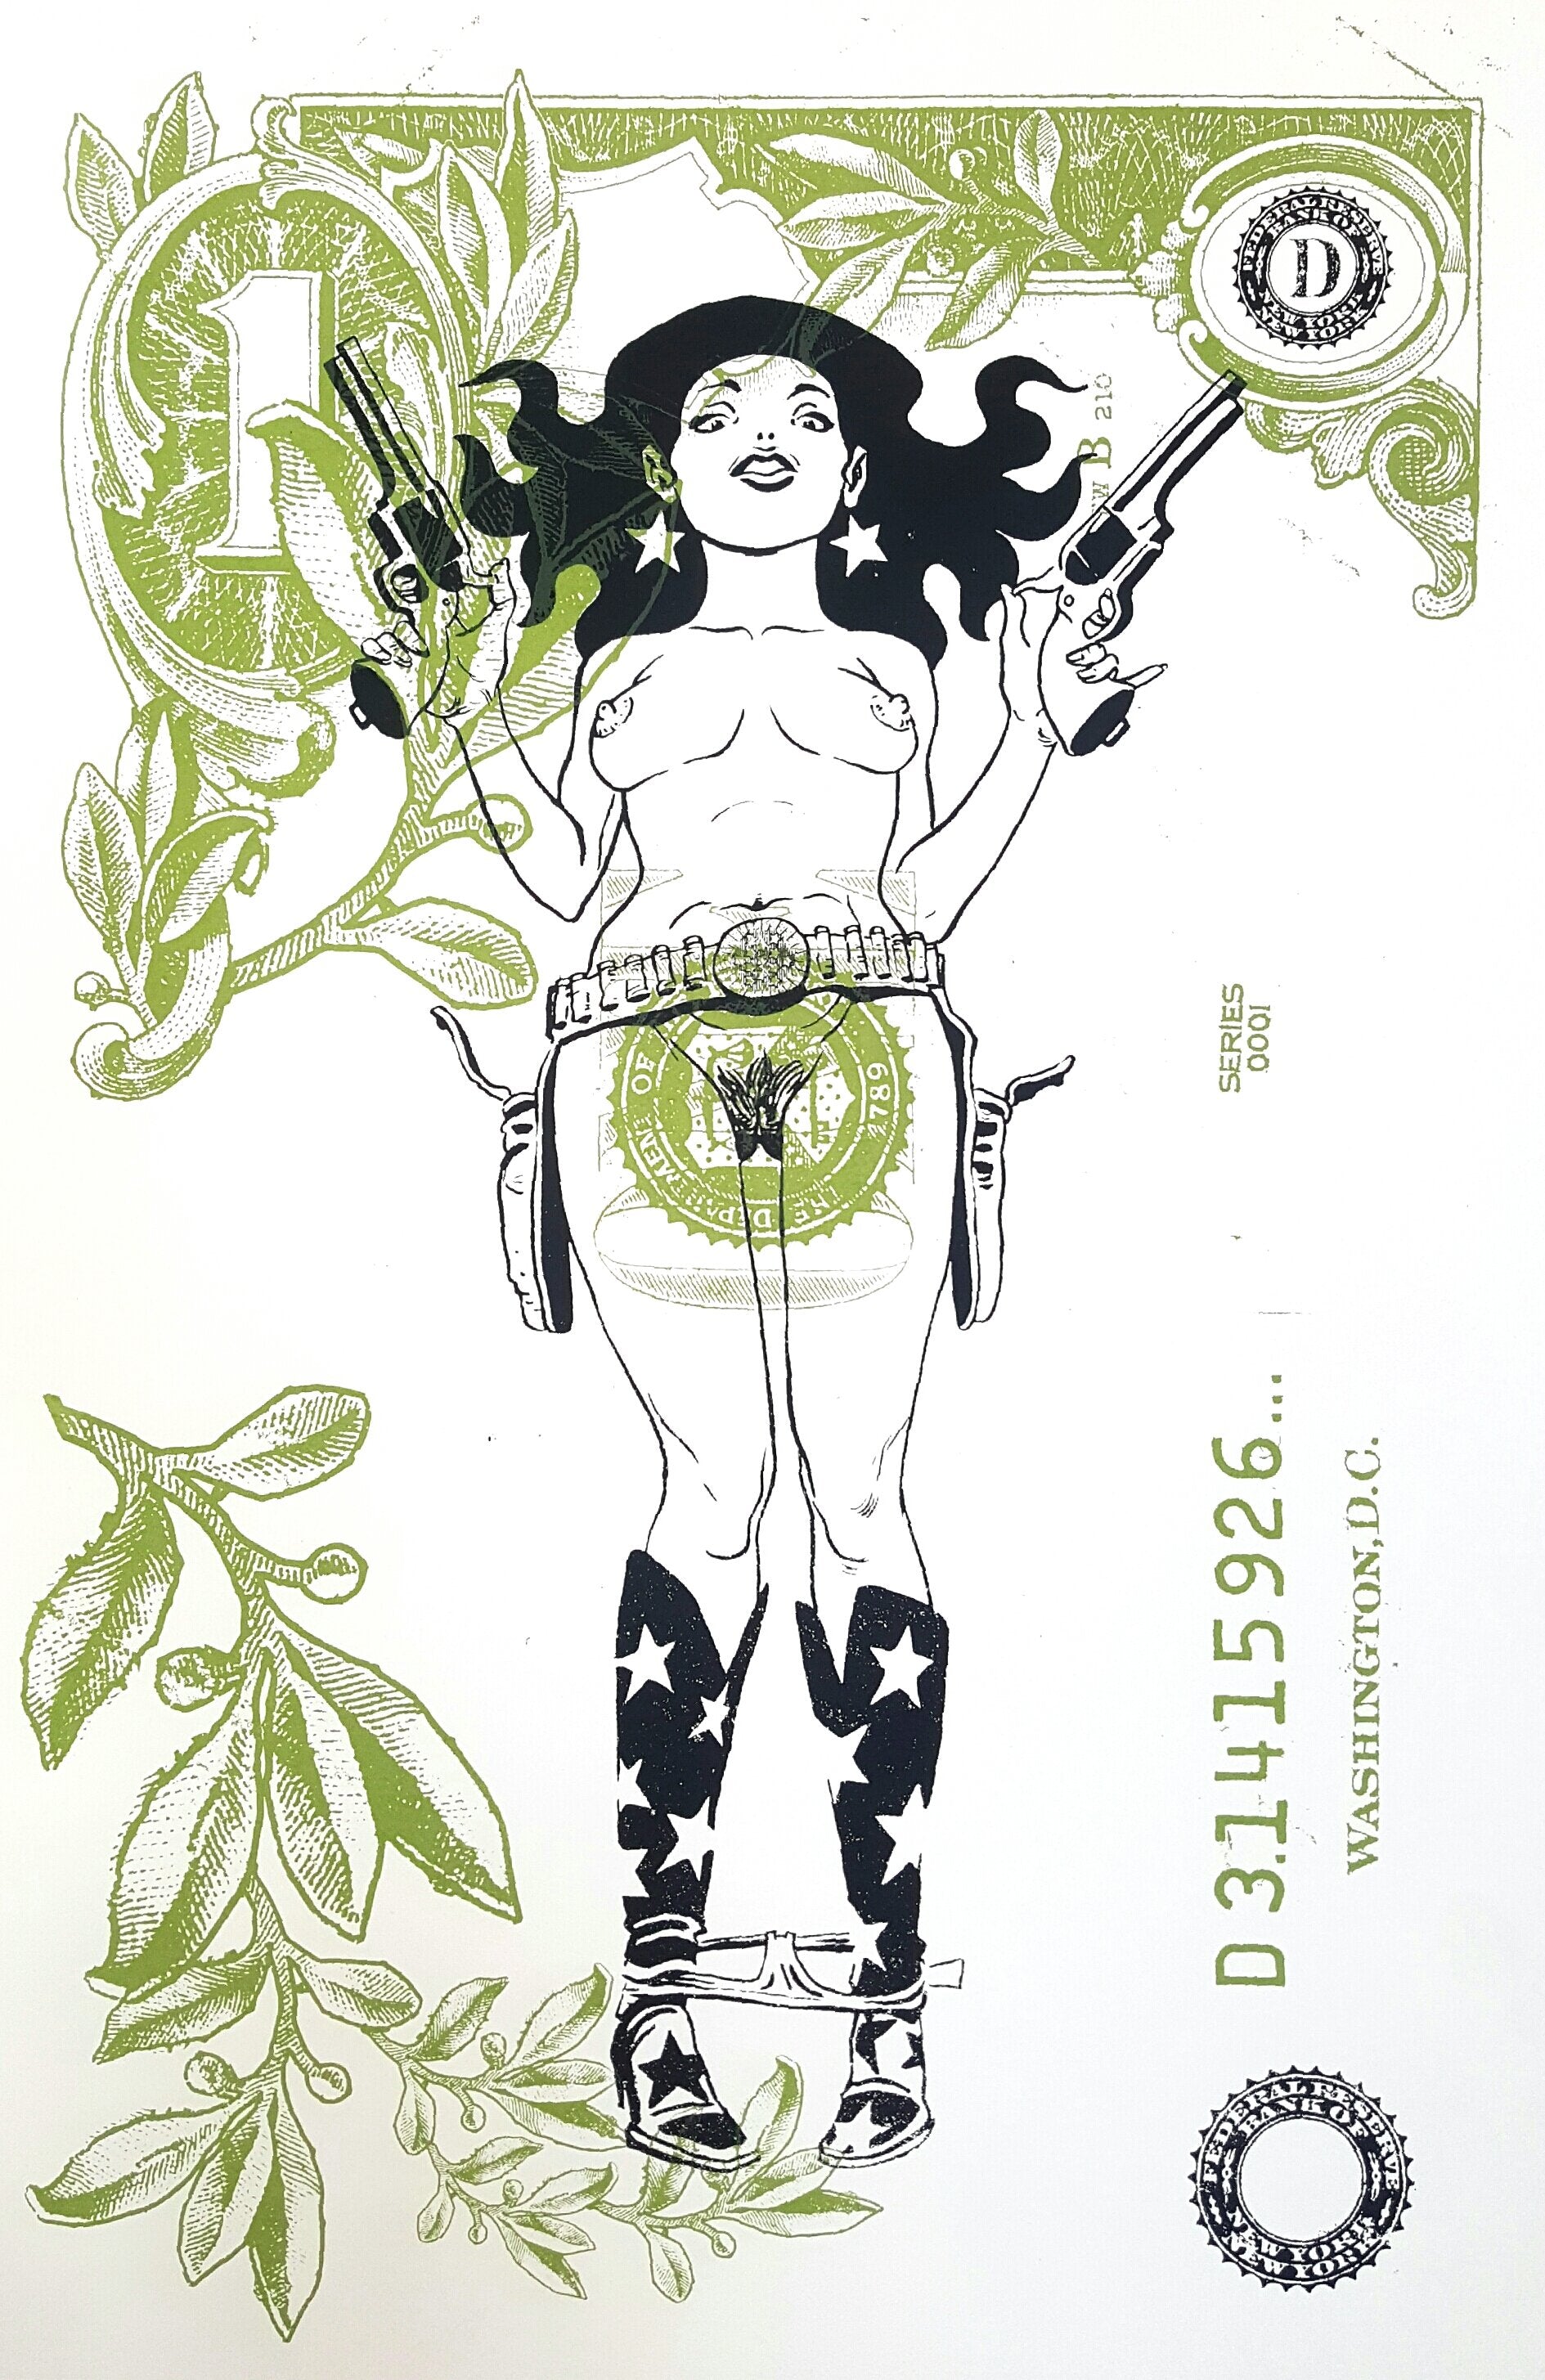 RON WIMBERLY 'OOTHON GIRL' SILKSCREENED PRINT (SIGNED EDITION OF 100)